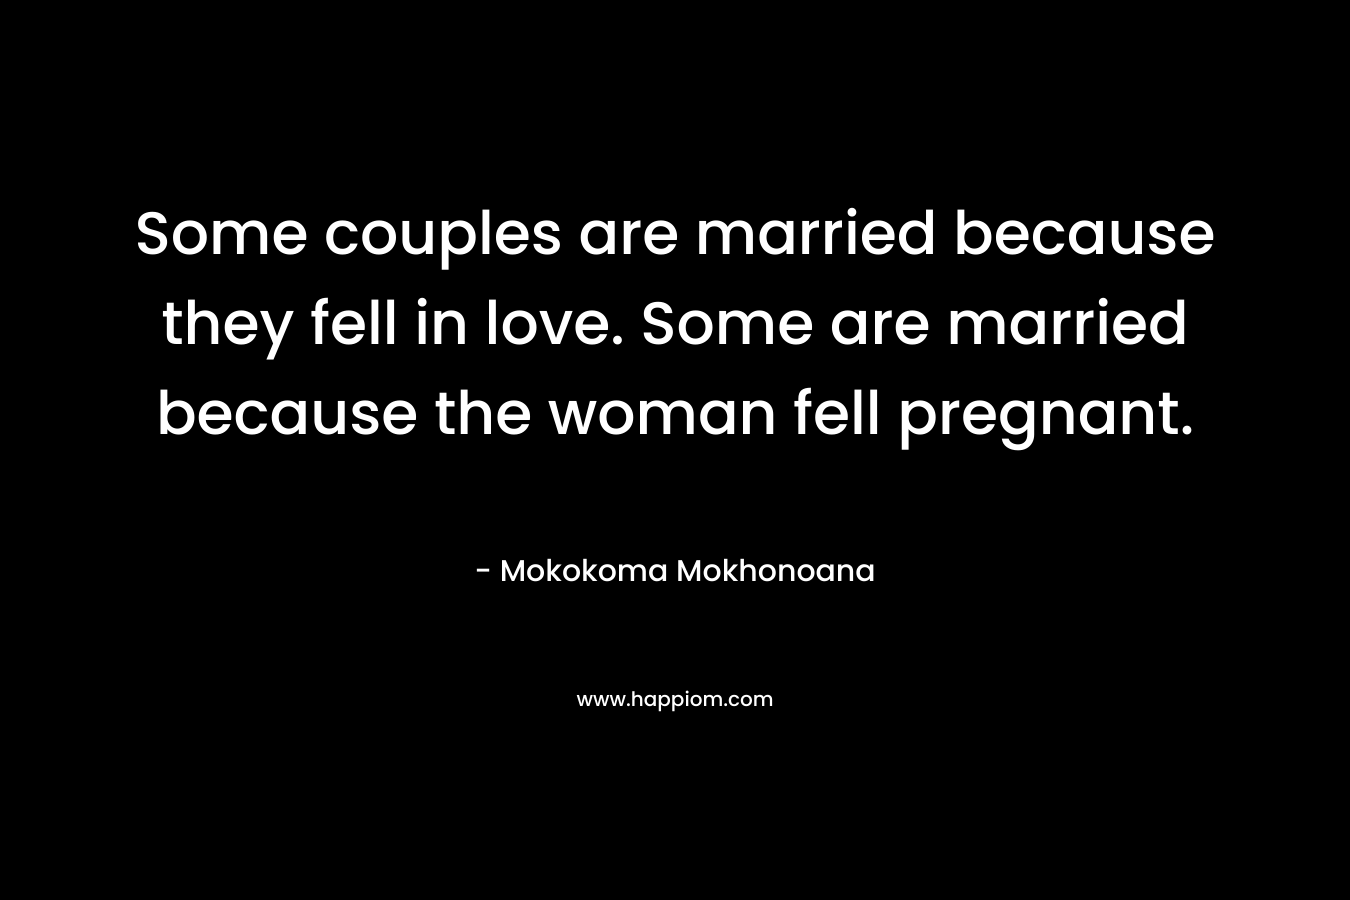 Some couples are married because they fell in love. Some are married because the woman fell pregnant.